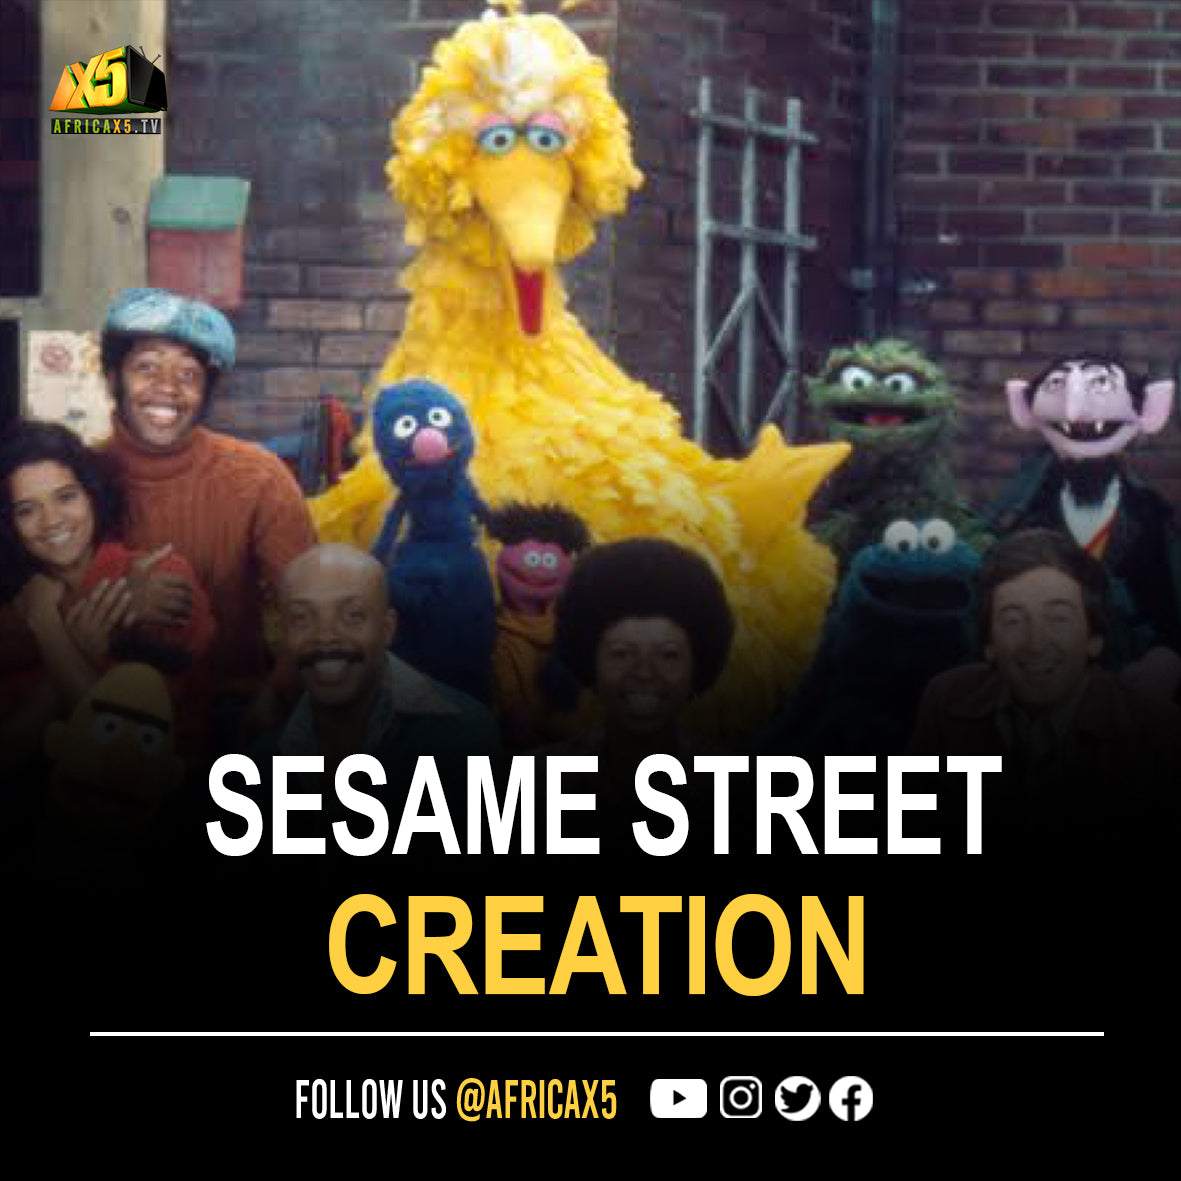 Sesame Street was originally created for black and brown inner city kids